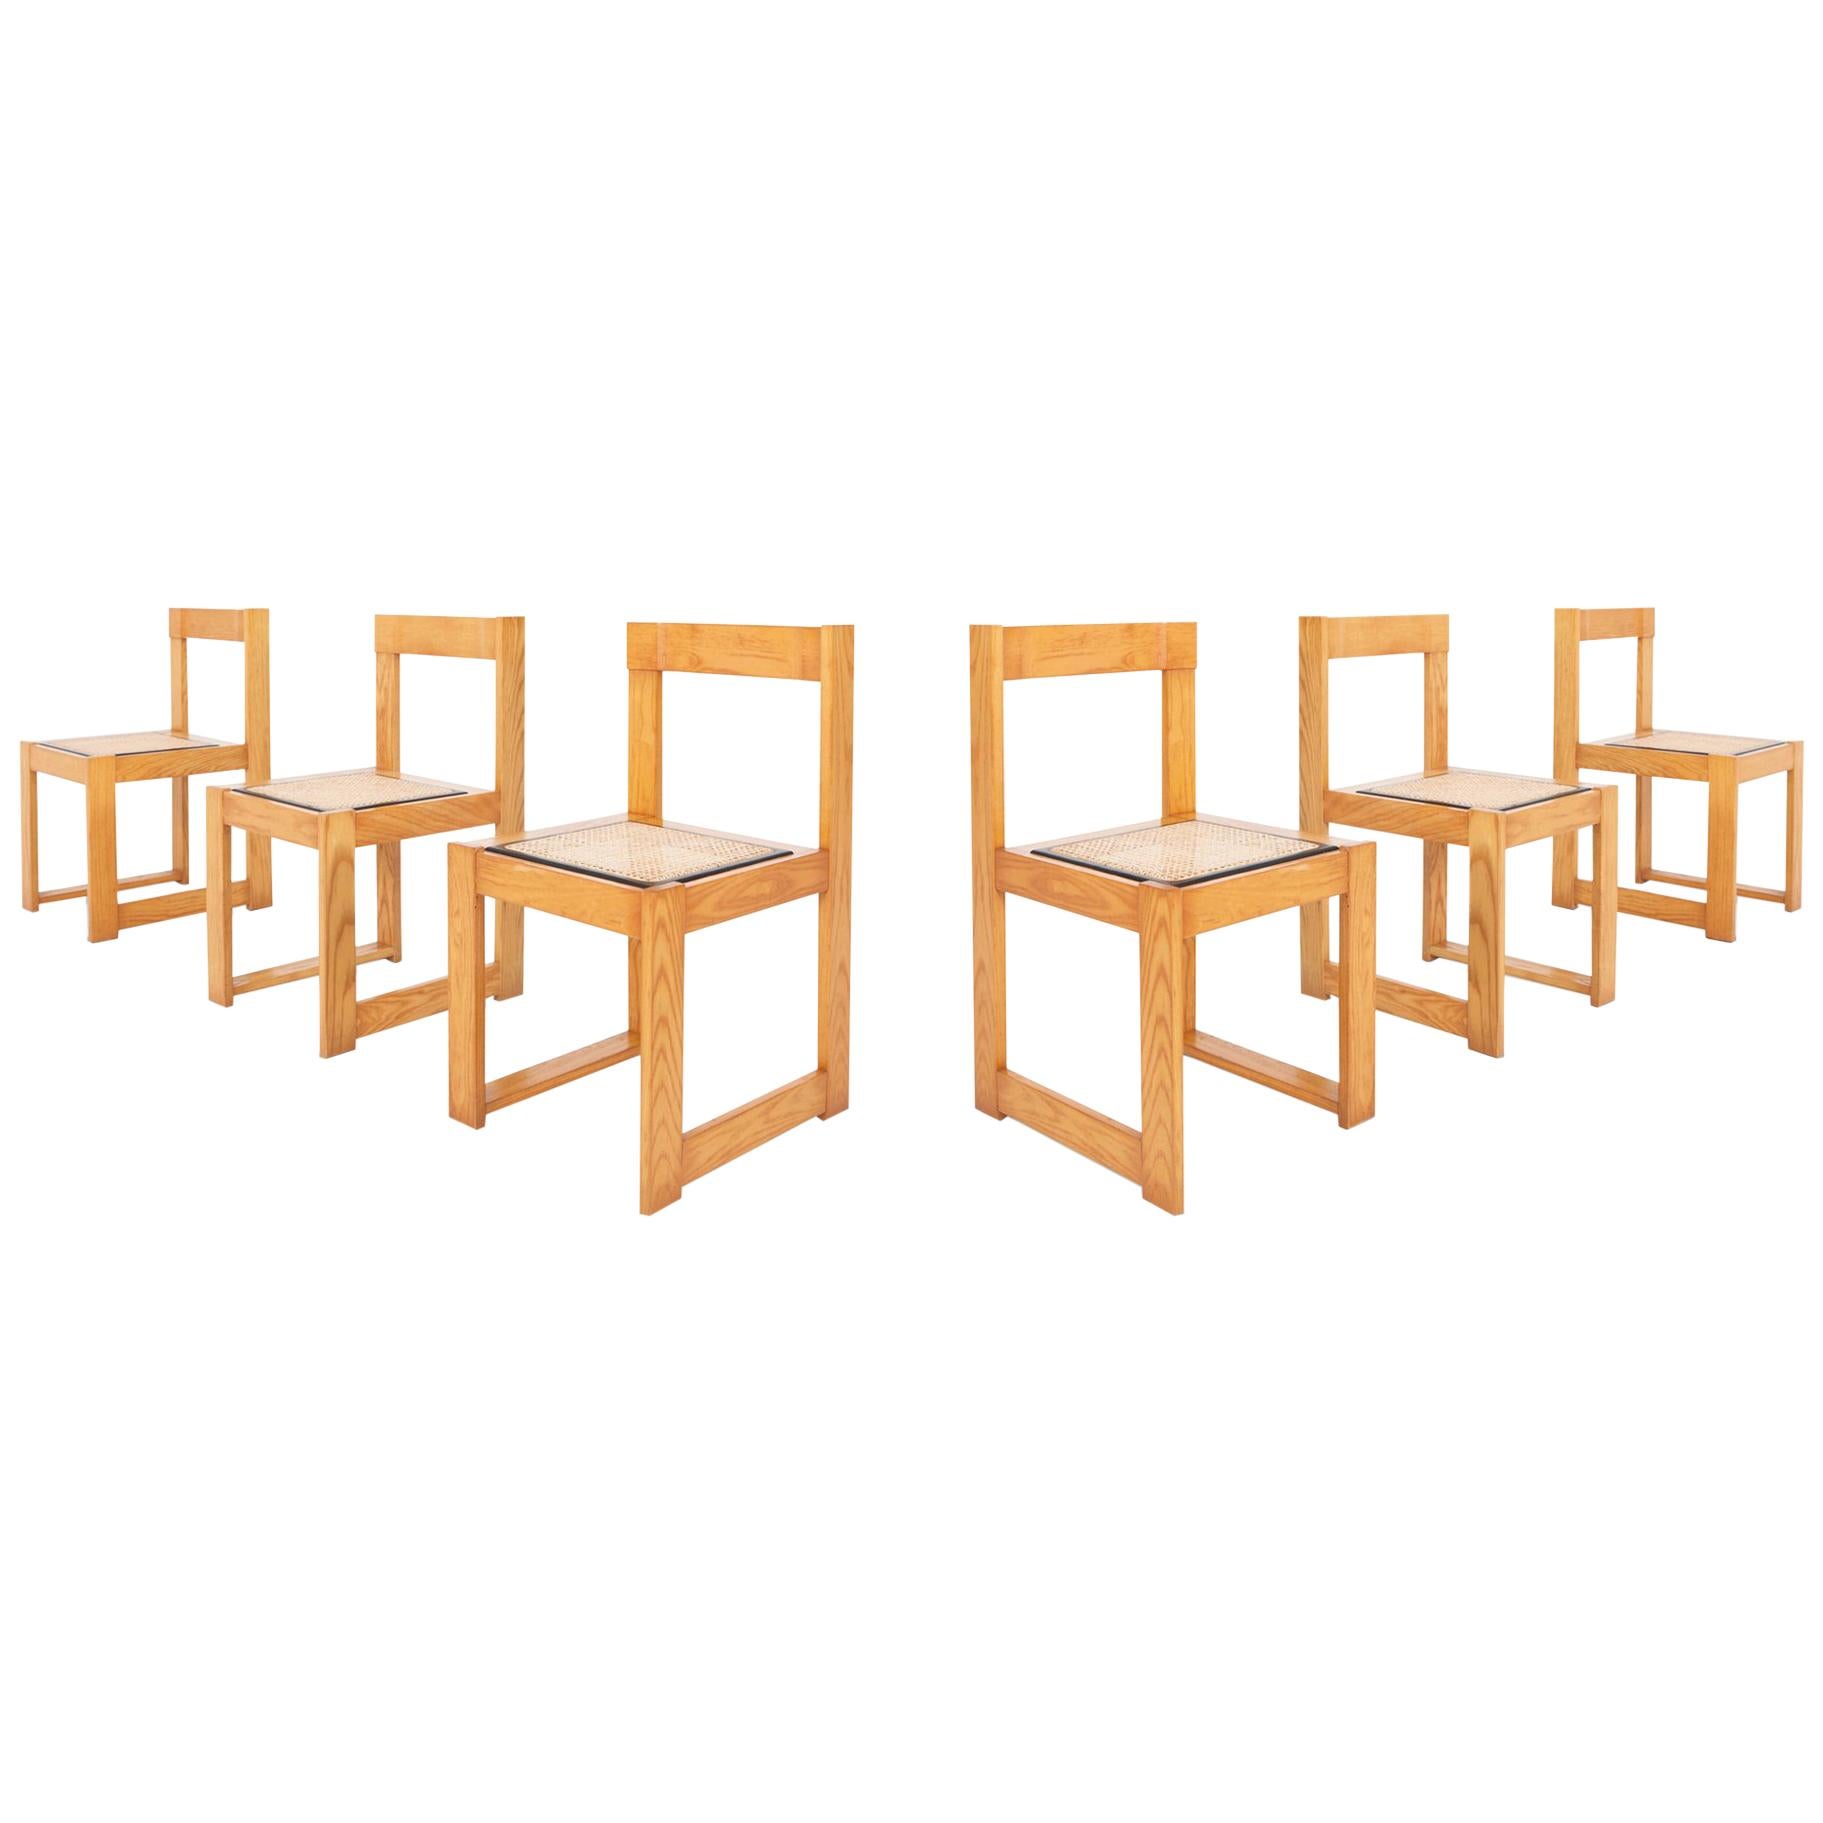 Italian post-modern dining chairs in pine, set of six